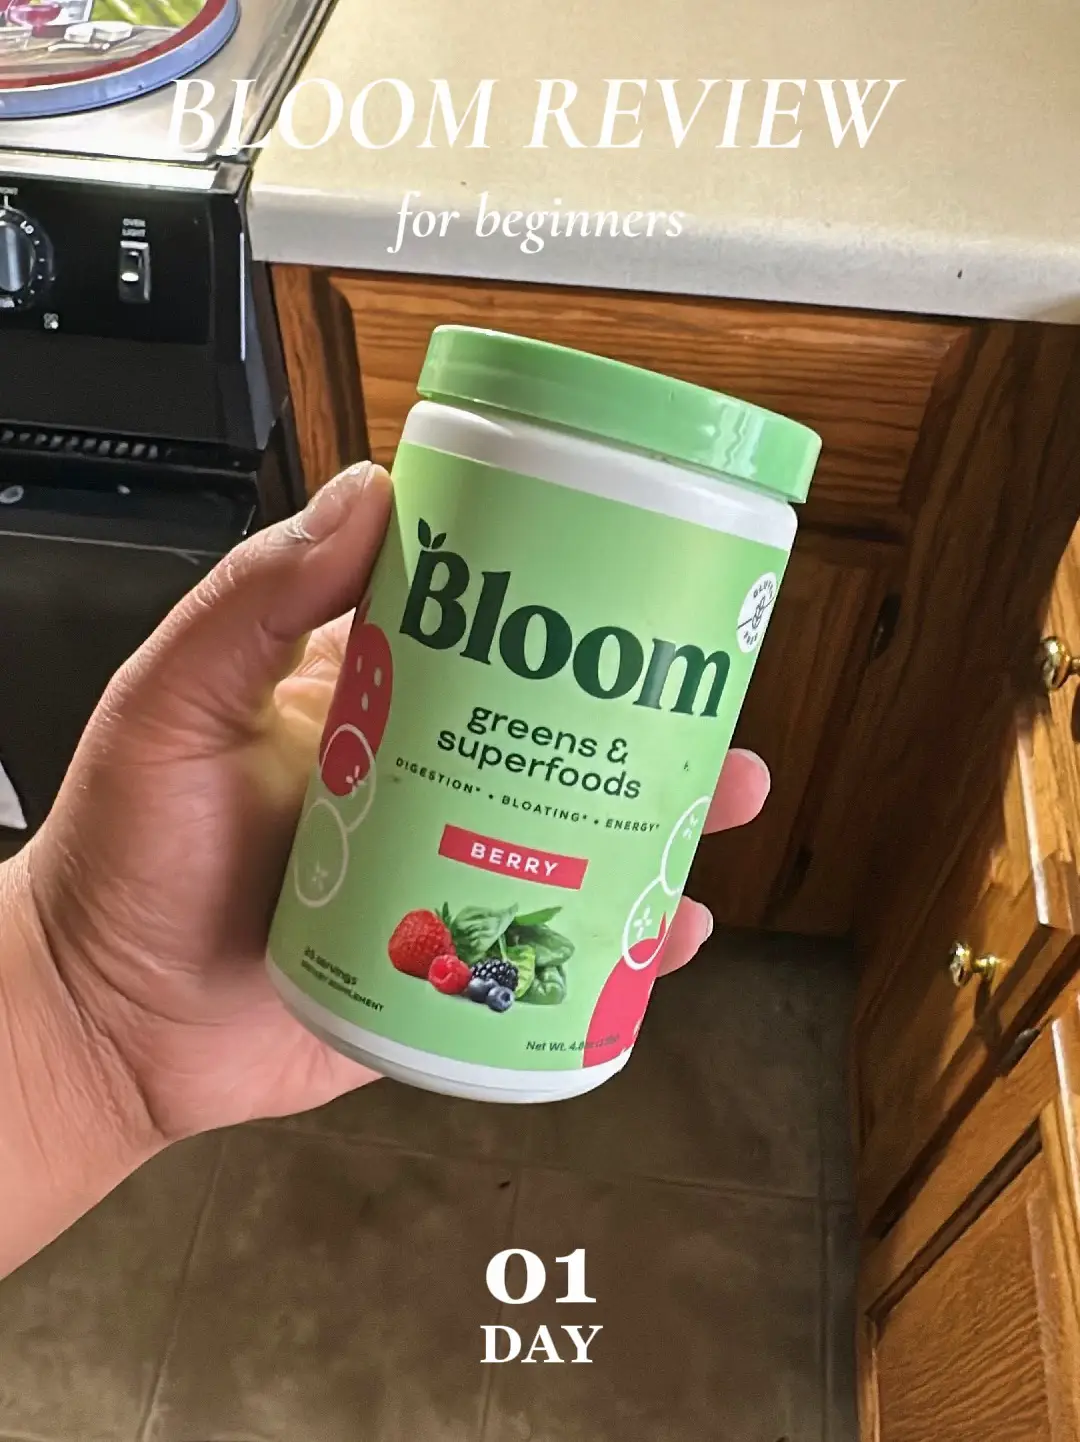 Bloom Nutrition Greens & Superfoods Berry Support Digestion 5.8